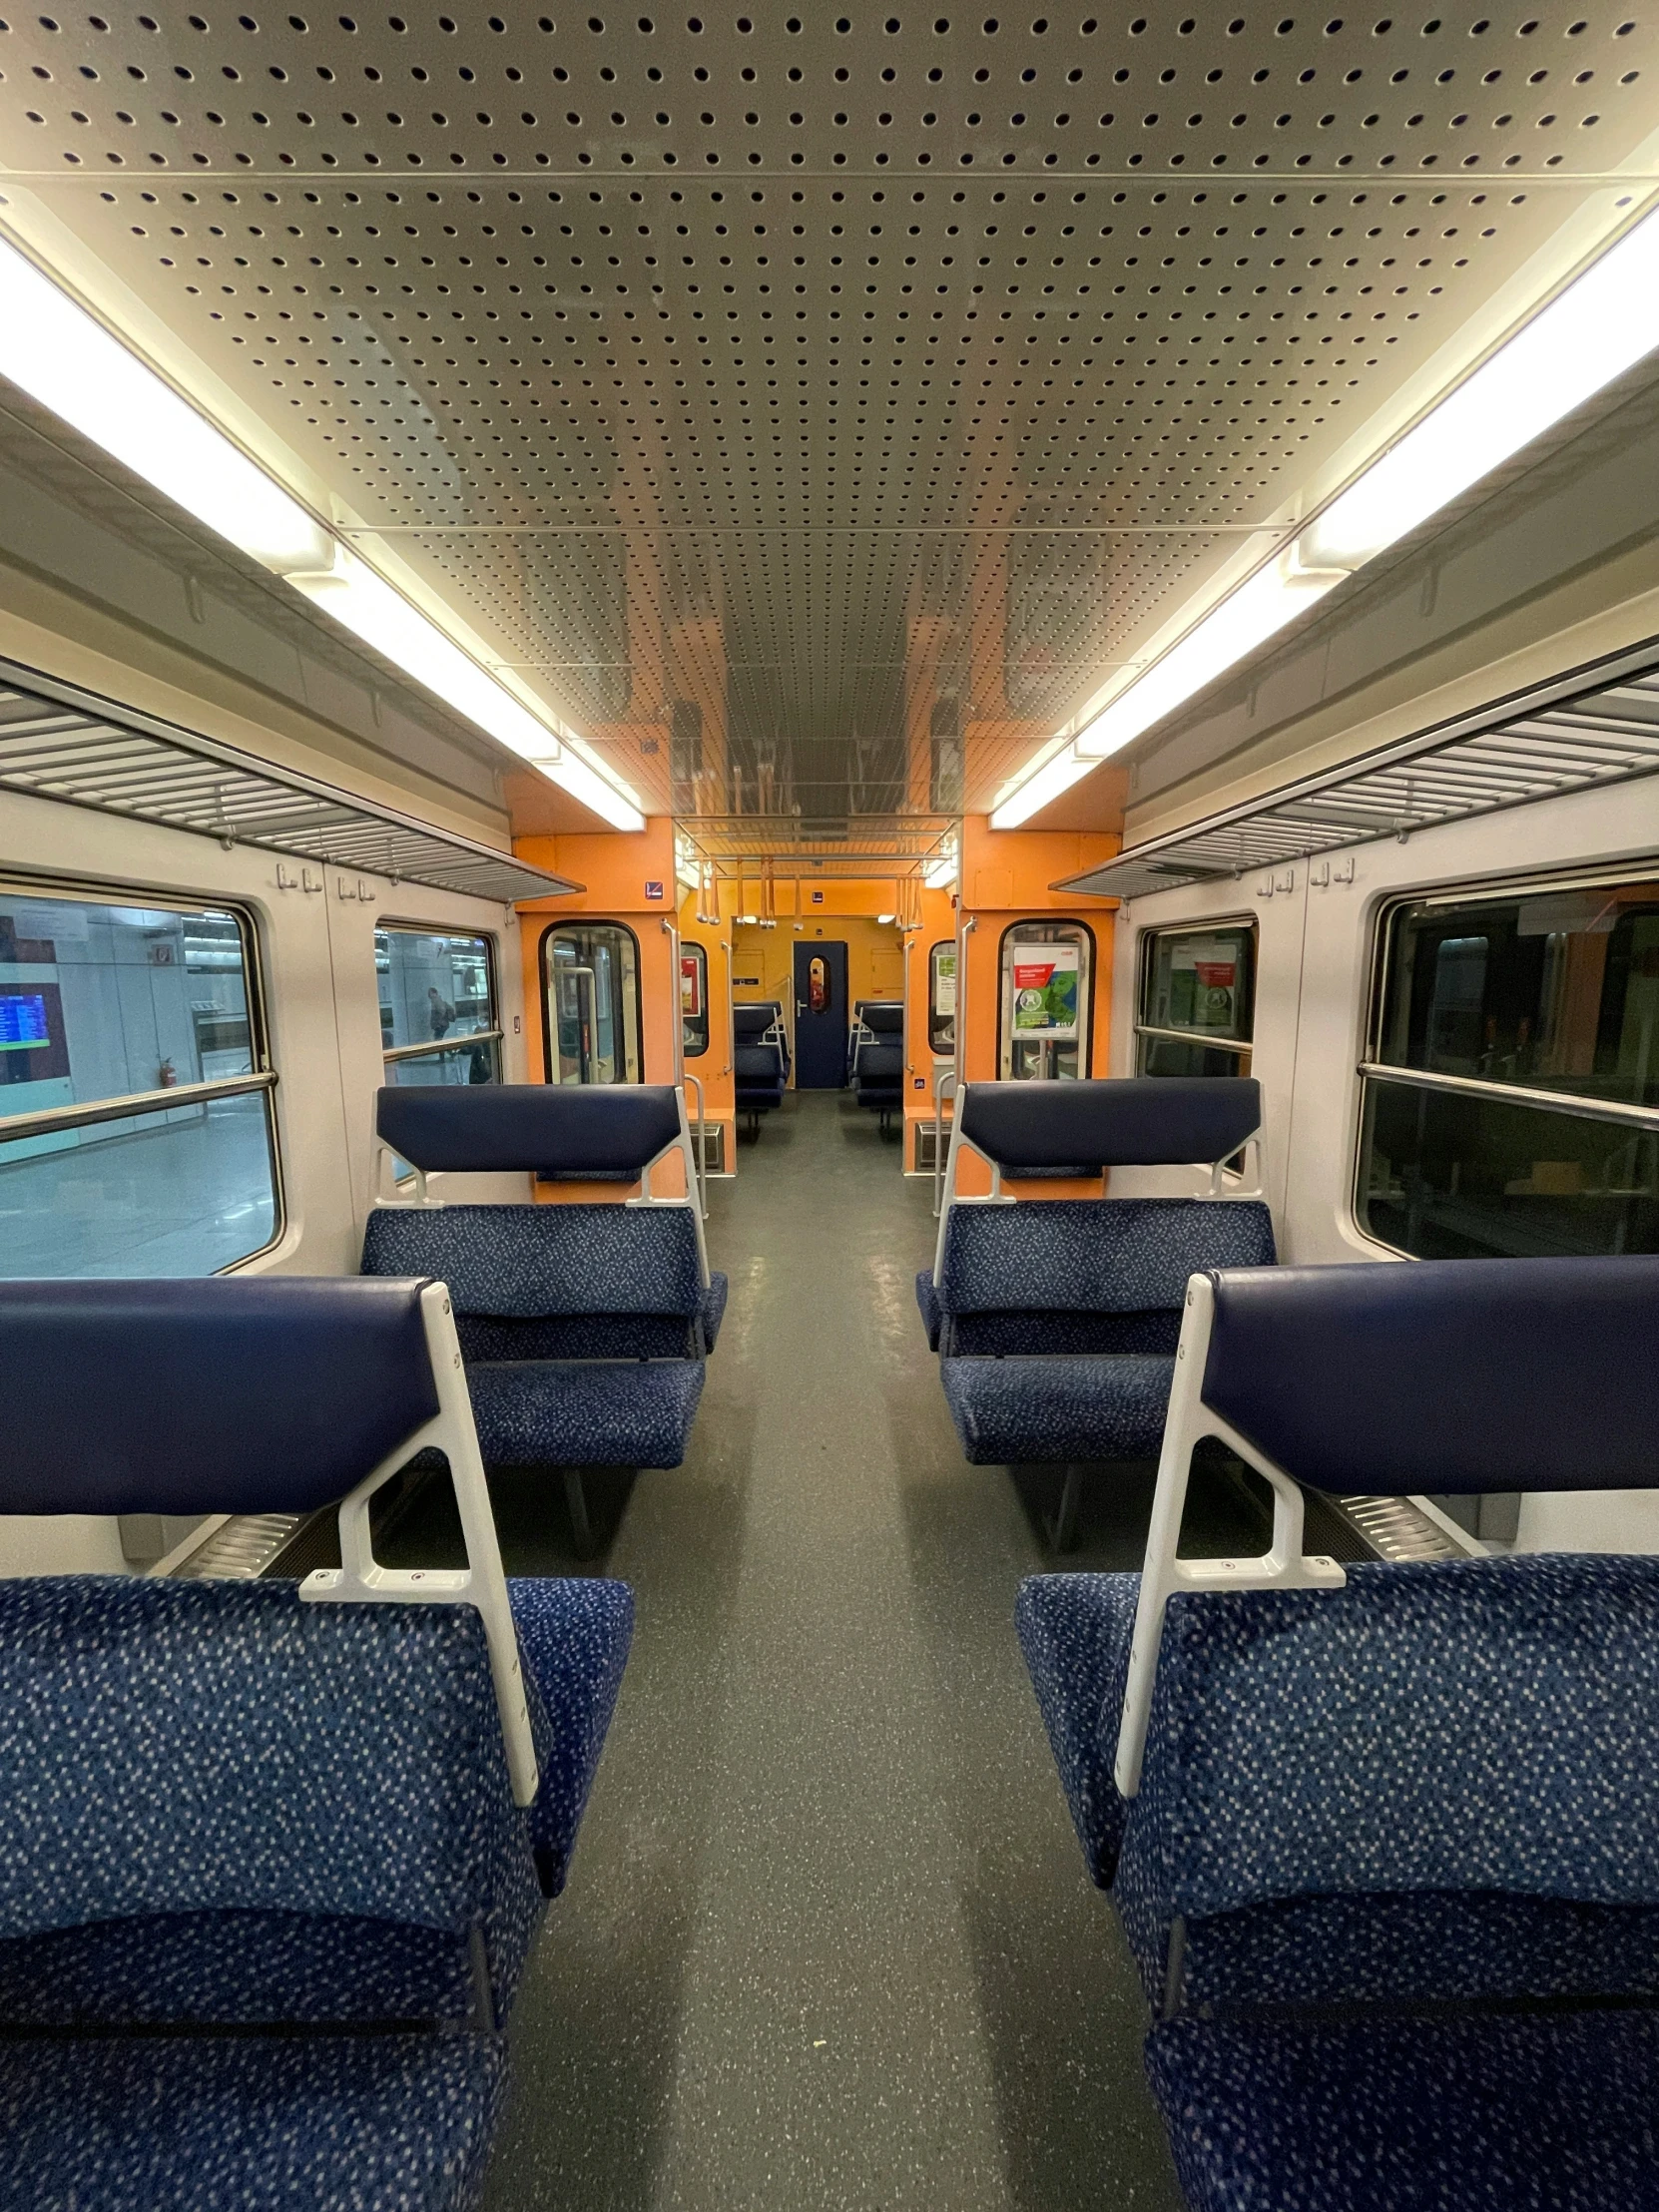 the interior of a metro train showing seats with blue and white covers